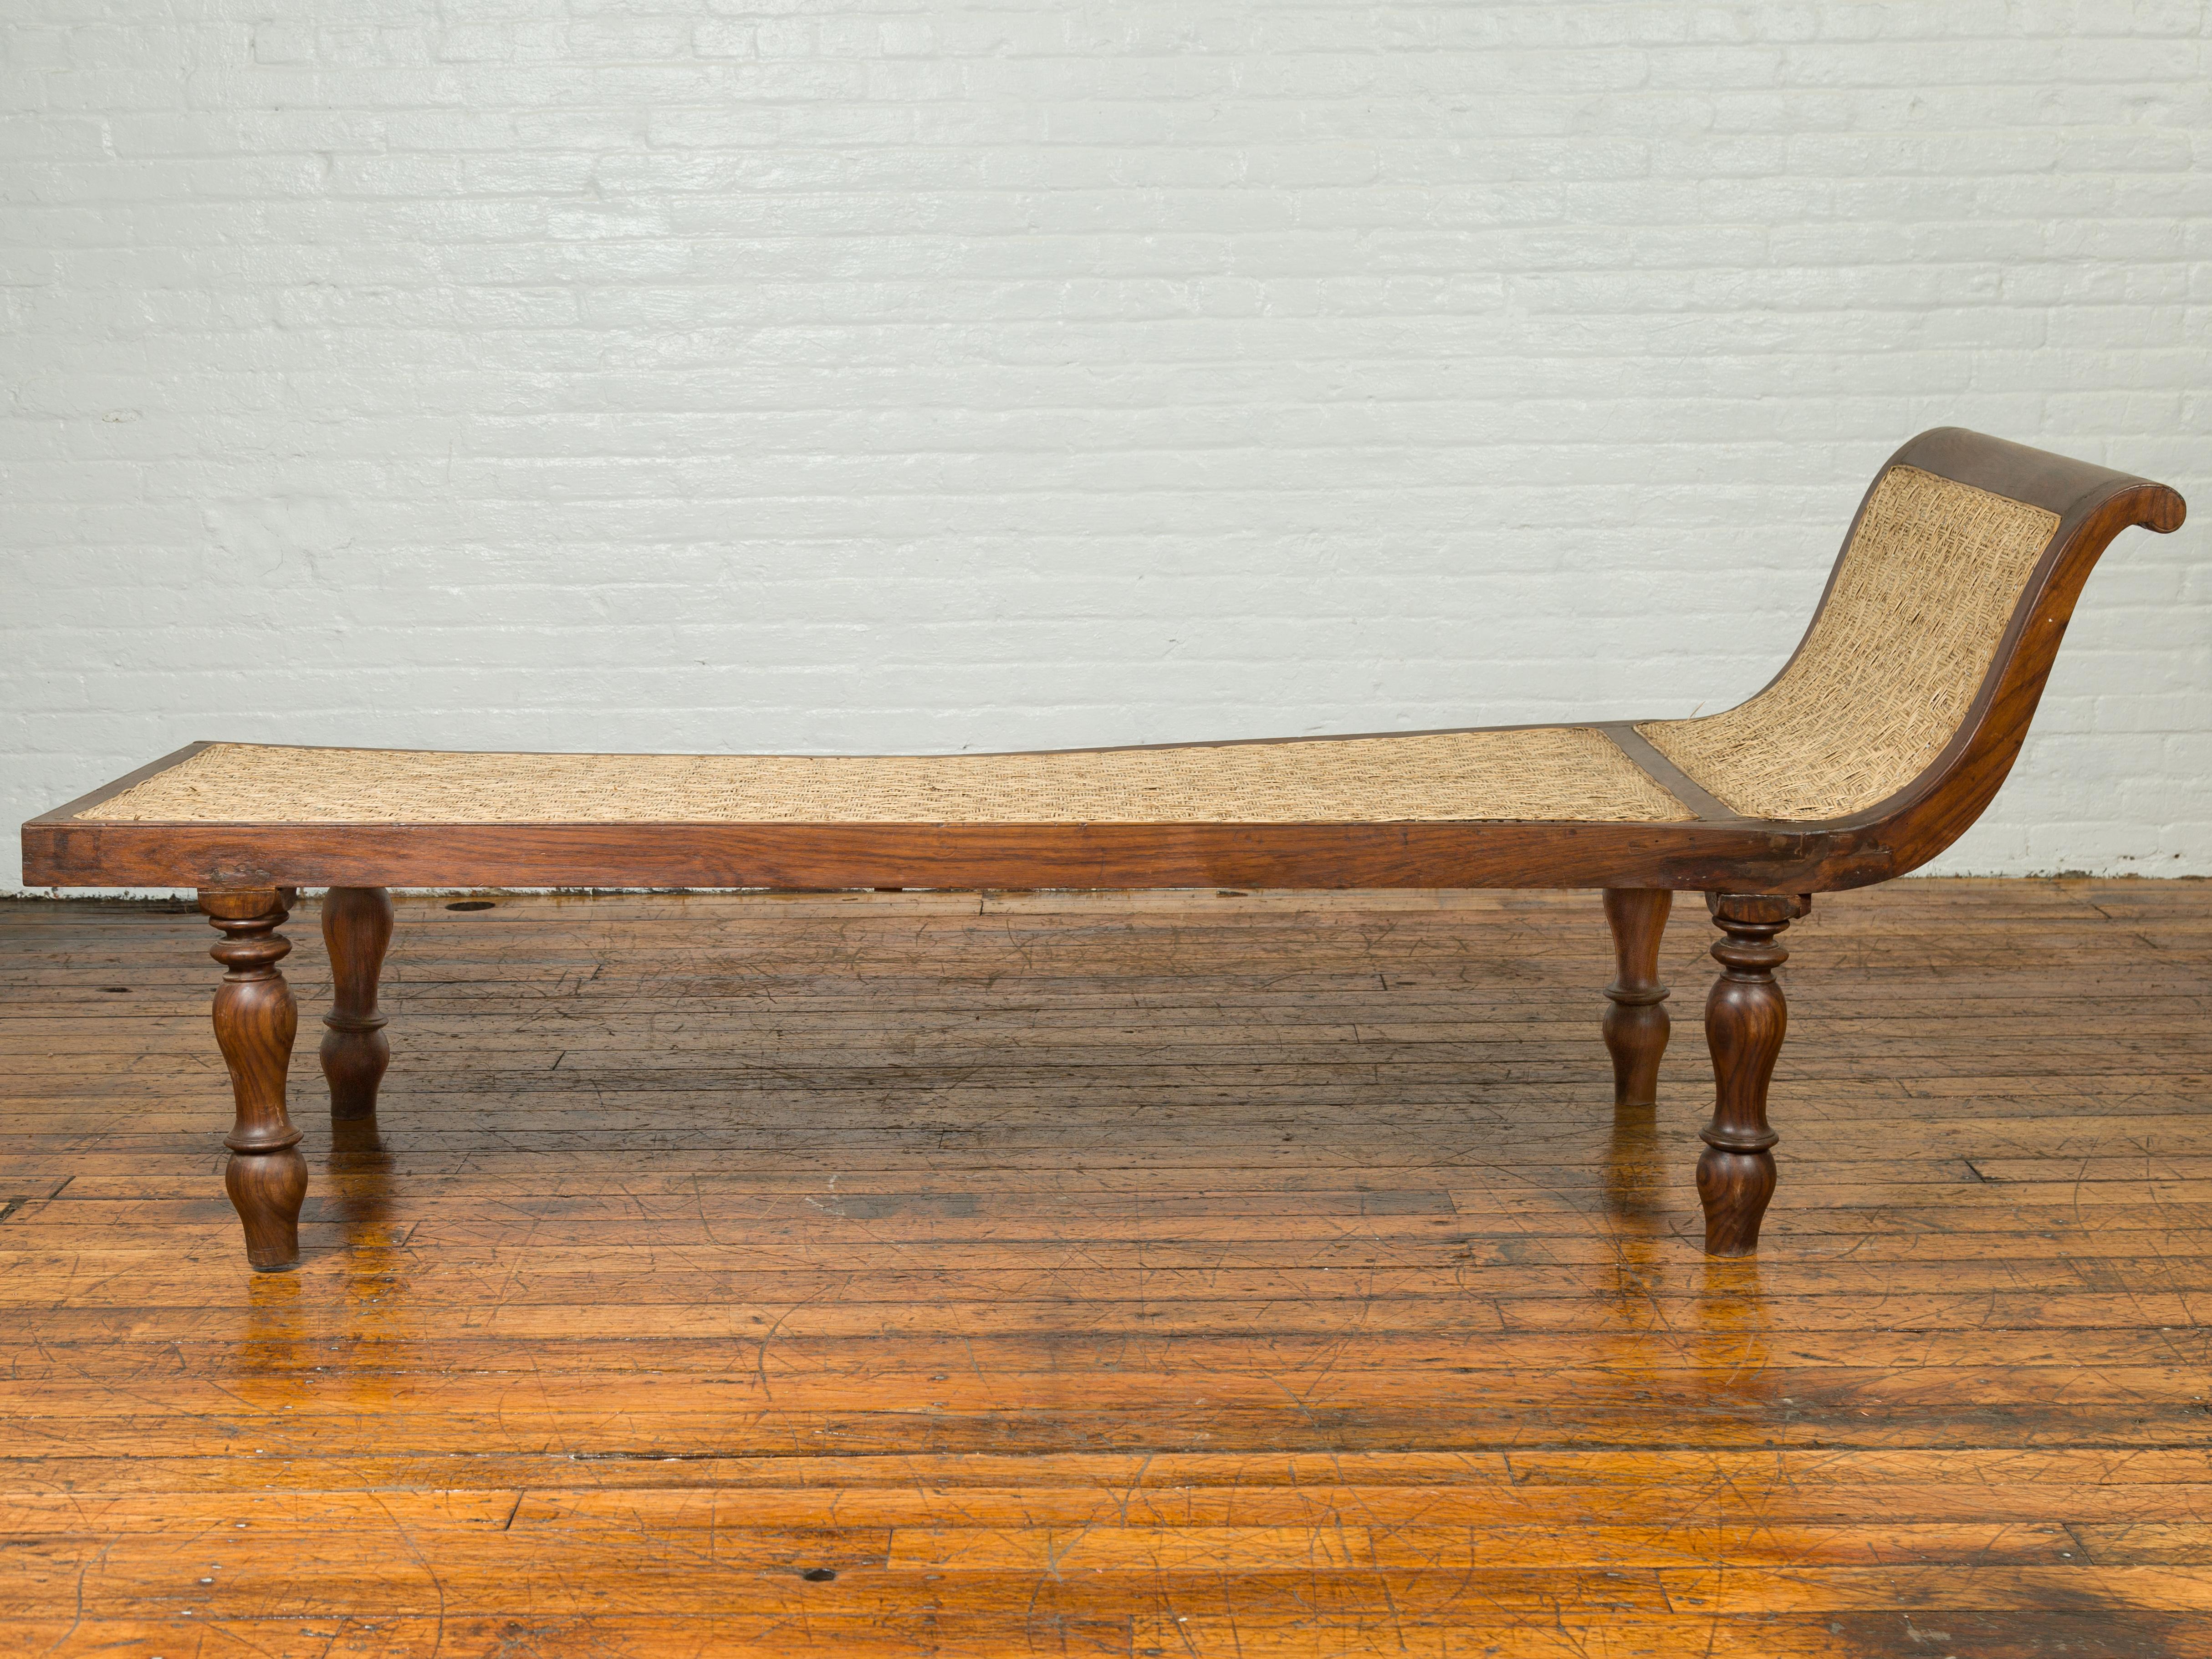 A Dutch Colonial Indonesian teak wood daybed from the late 19th century, with rattan seat and turned legs. Found in Jakarta, this Dutch Colonial daybed features an out-scrolling back, flowing seamlessly into the long rectangular seat. Covered with